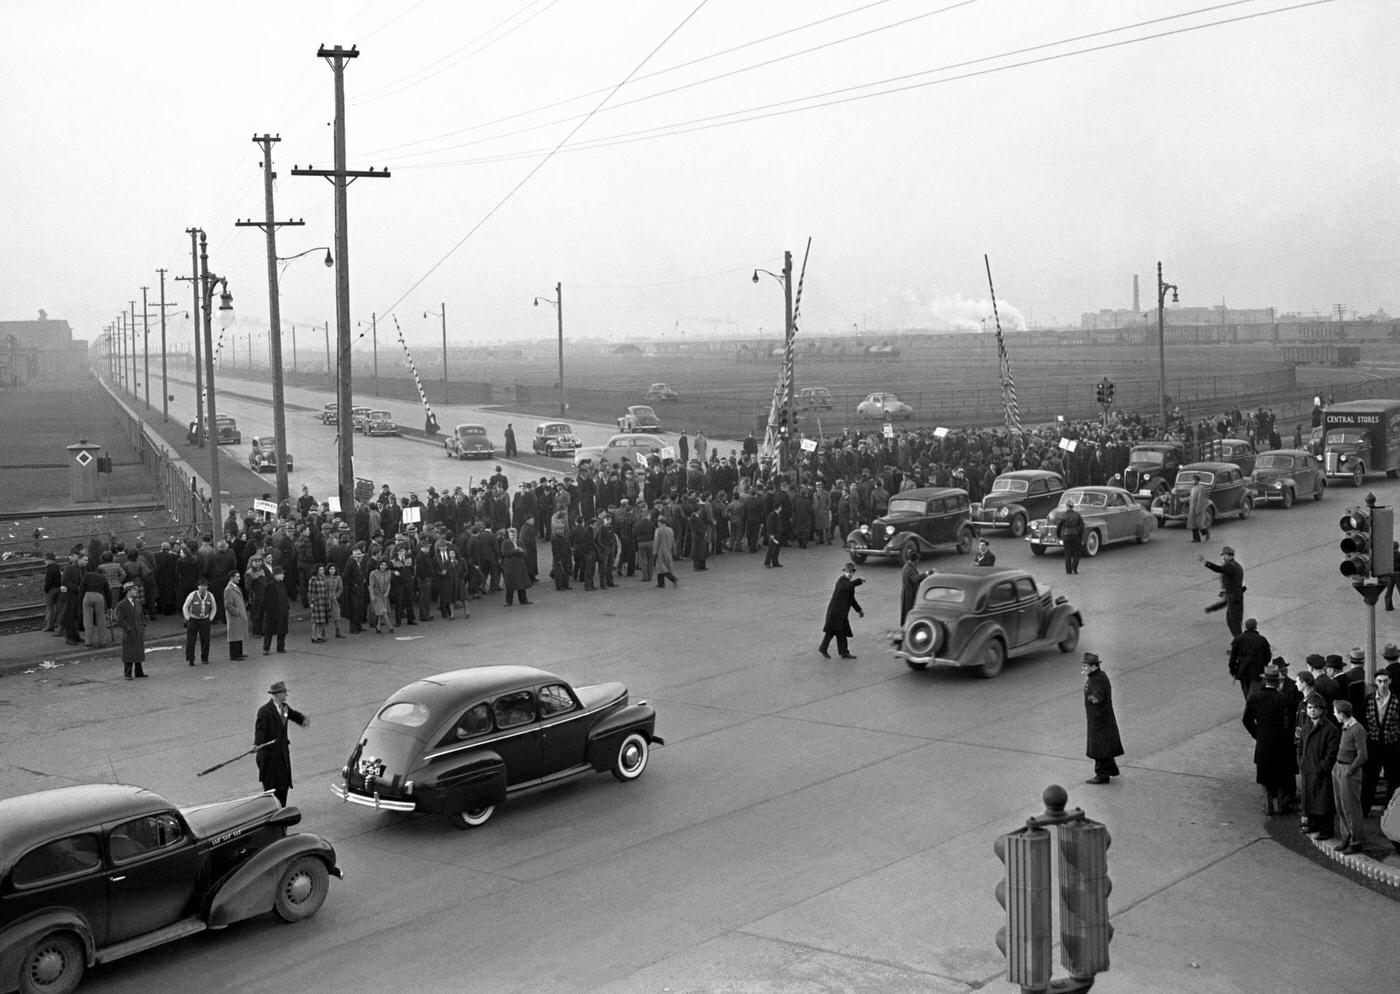 A large crowd of people stand on the sidewalk during the Detroit Ford Motor Company Labor Strike near the Ford River Rouge complex in Dearborn, Michigan, April 1941